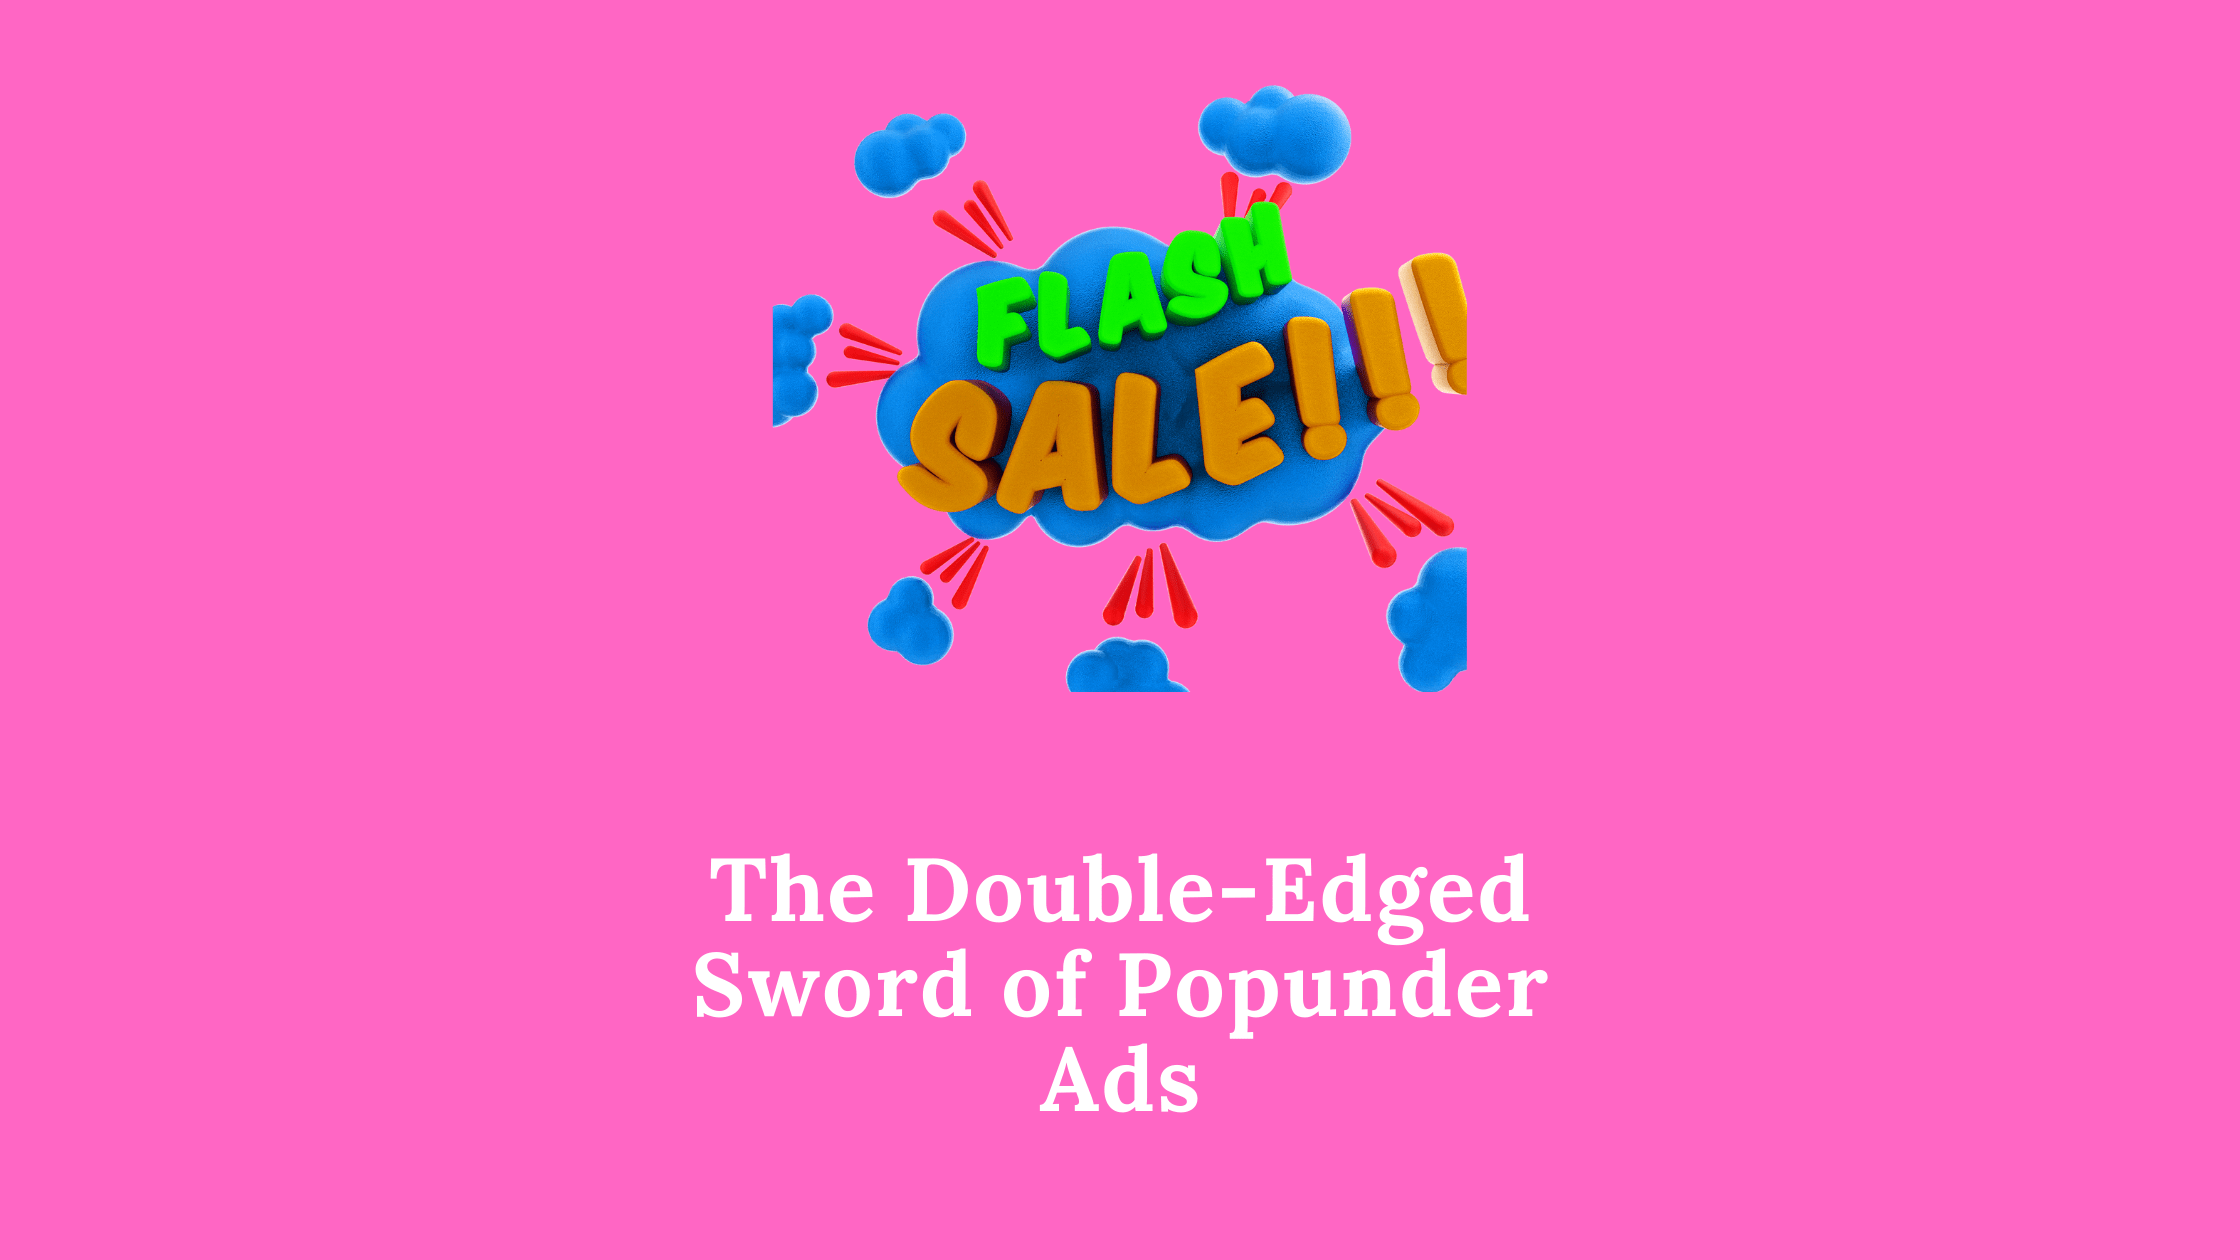 The Double-Edged Sword of Popunder Ads